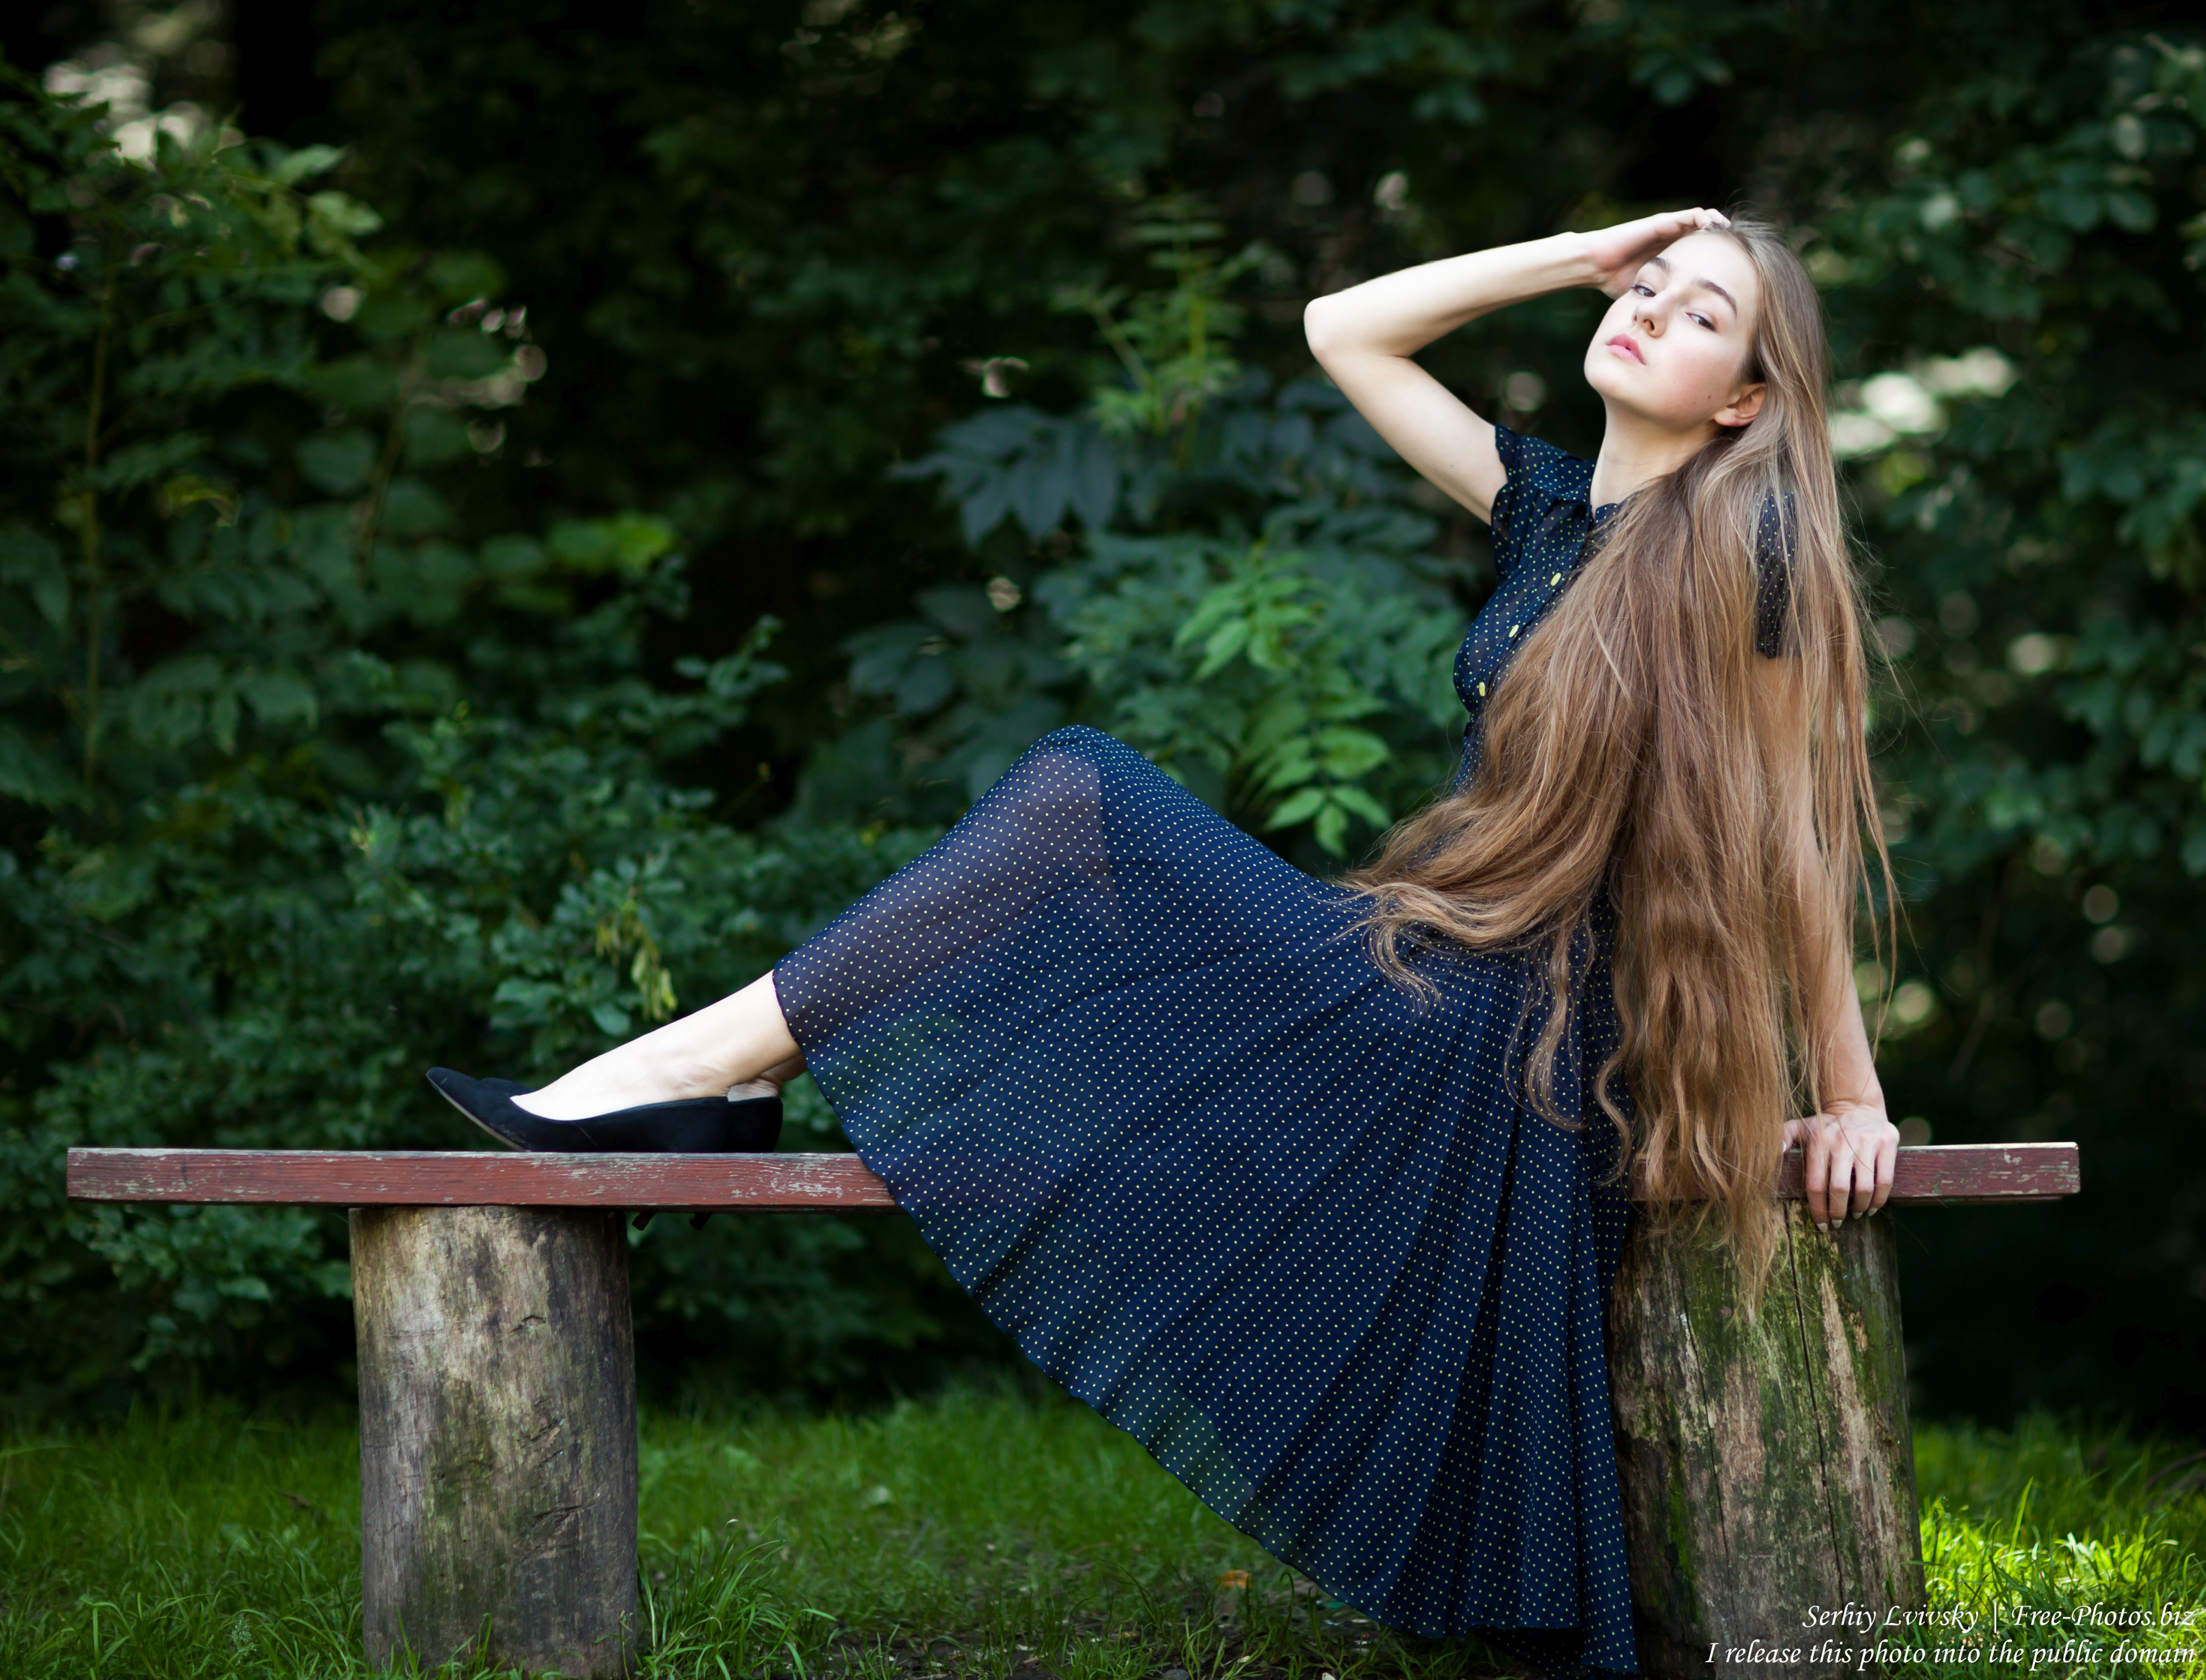 justyna_a_16-year-old_fair-haired_girl_photographed_in_june_2018_by_serhiy_lvivsky_22